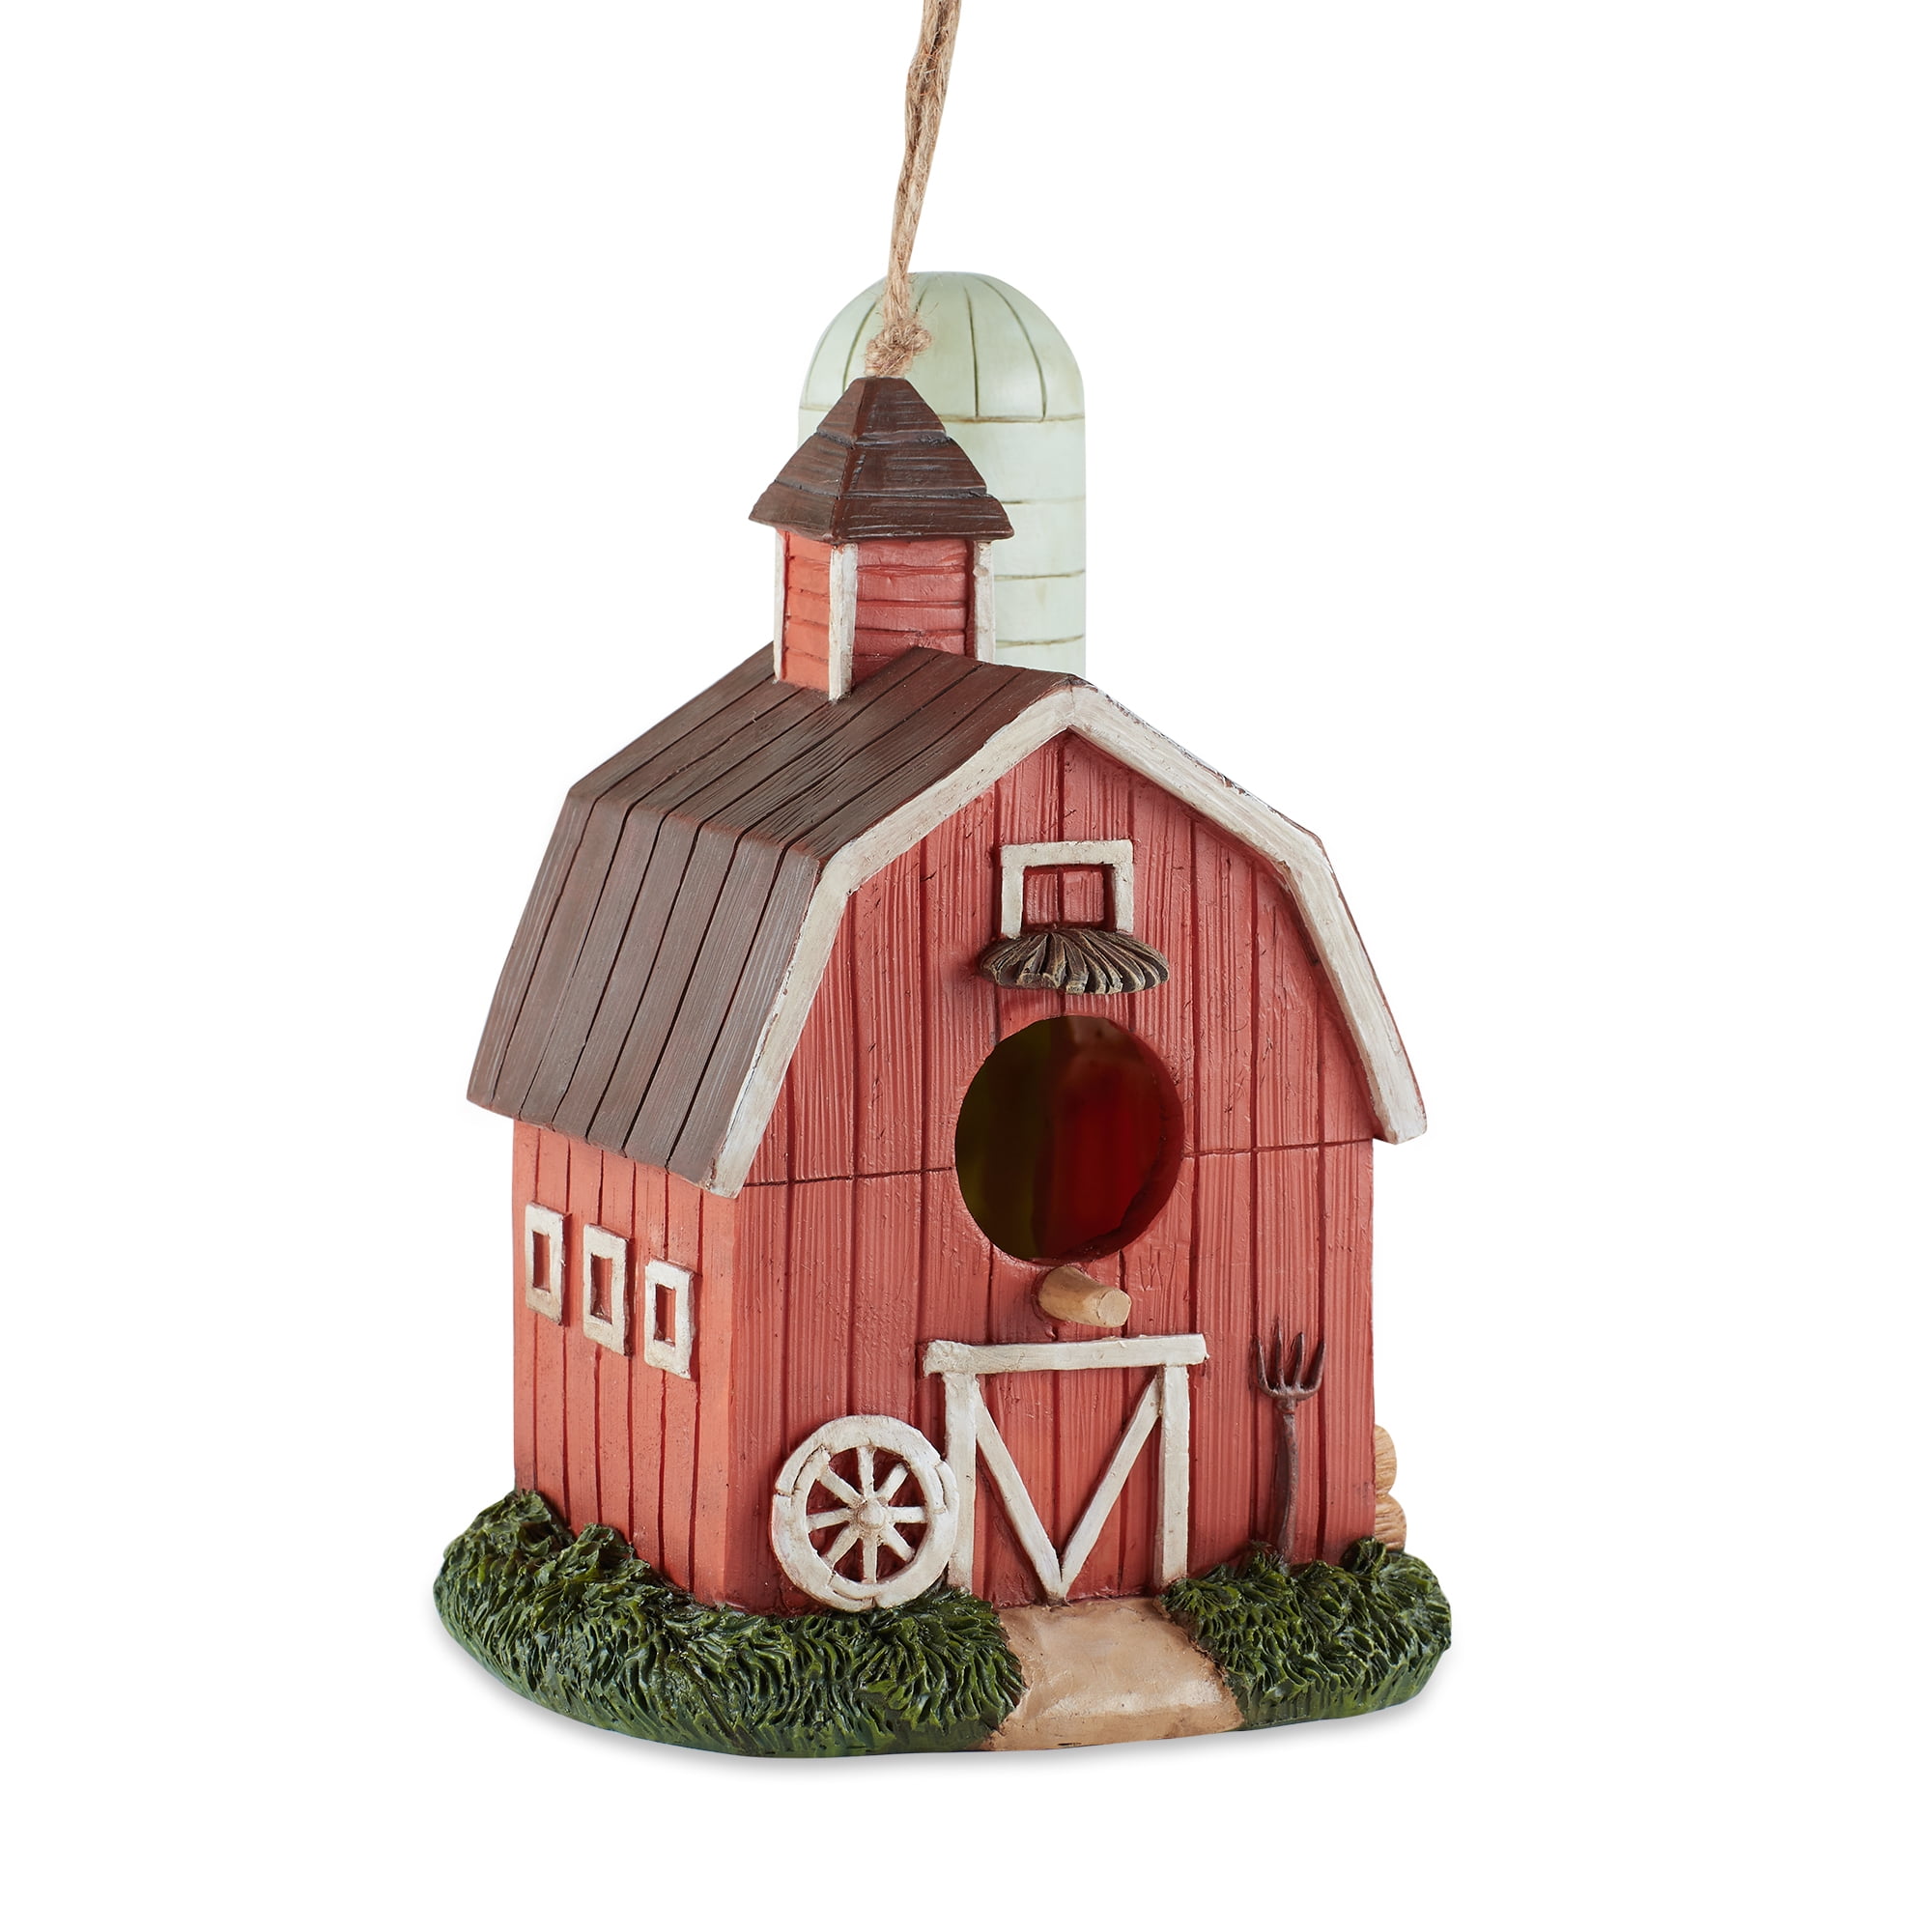 Details about   Birdhouse Patriotic Wooden Red White Stripes Patterned Tin Roof Star Opening New 